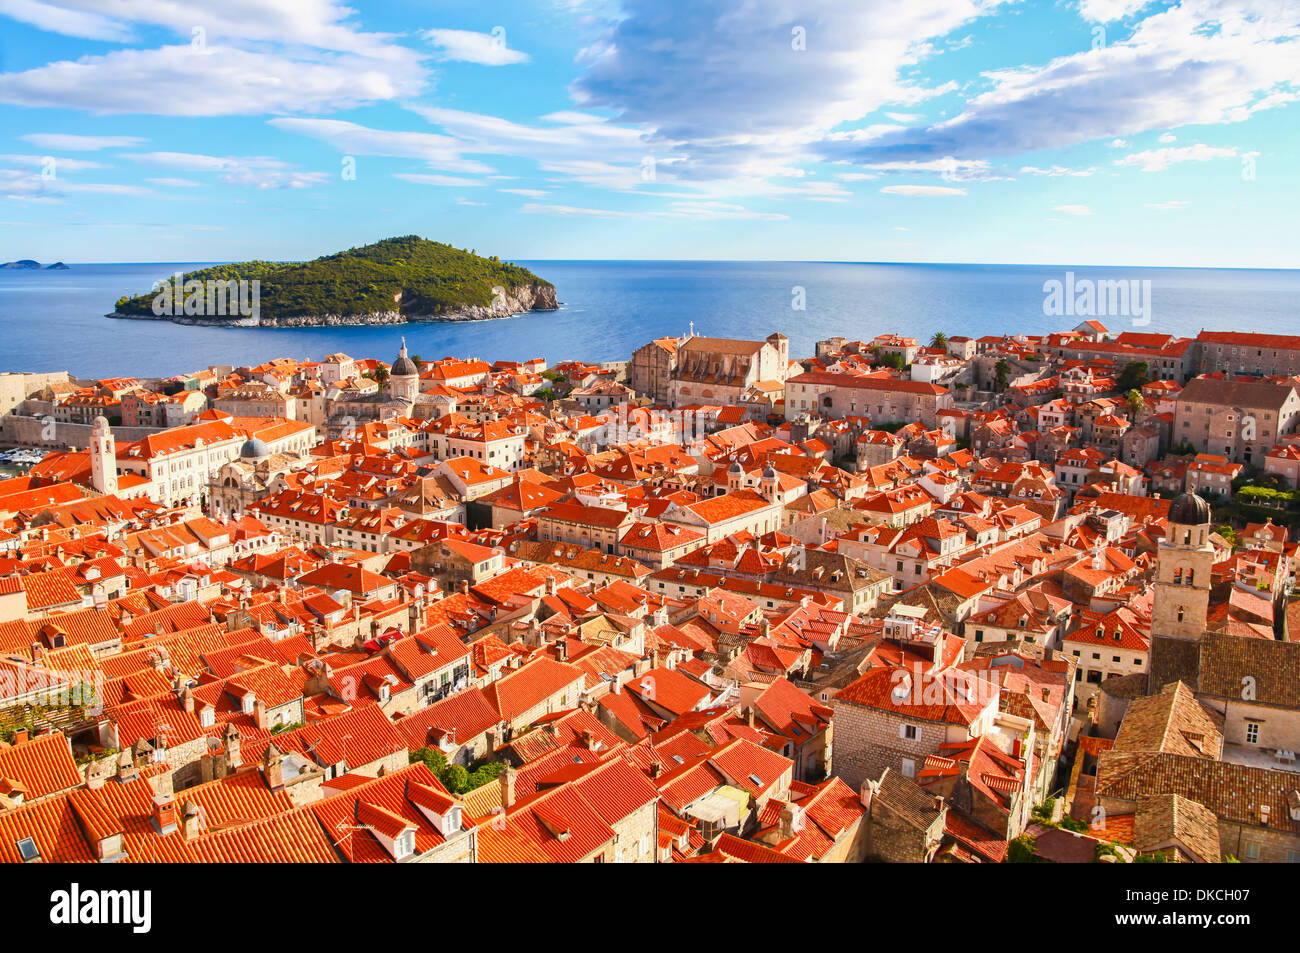 View of many landmarks of Old town in city of Dubrovnik, Croatia Stock Photo